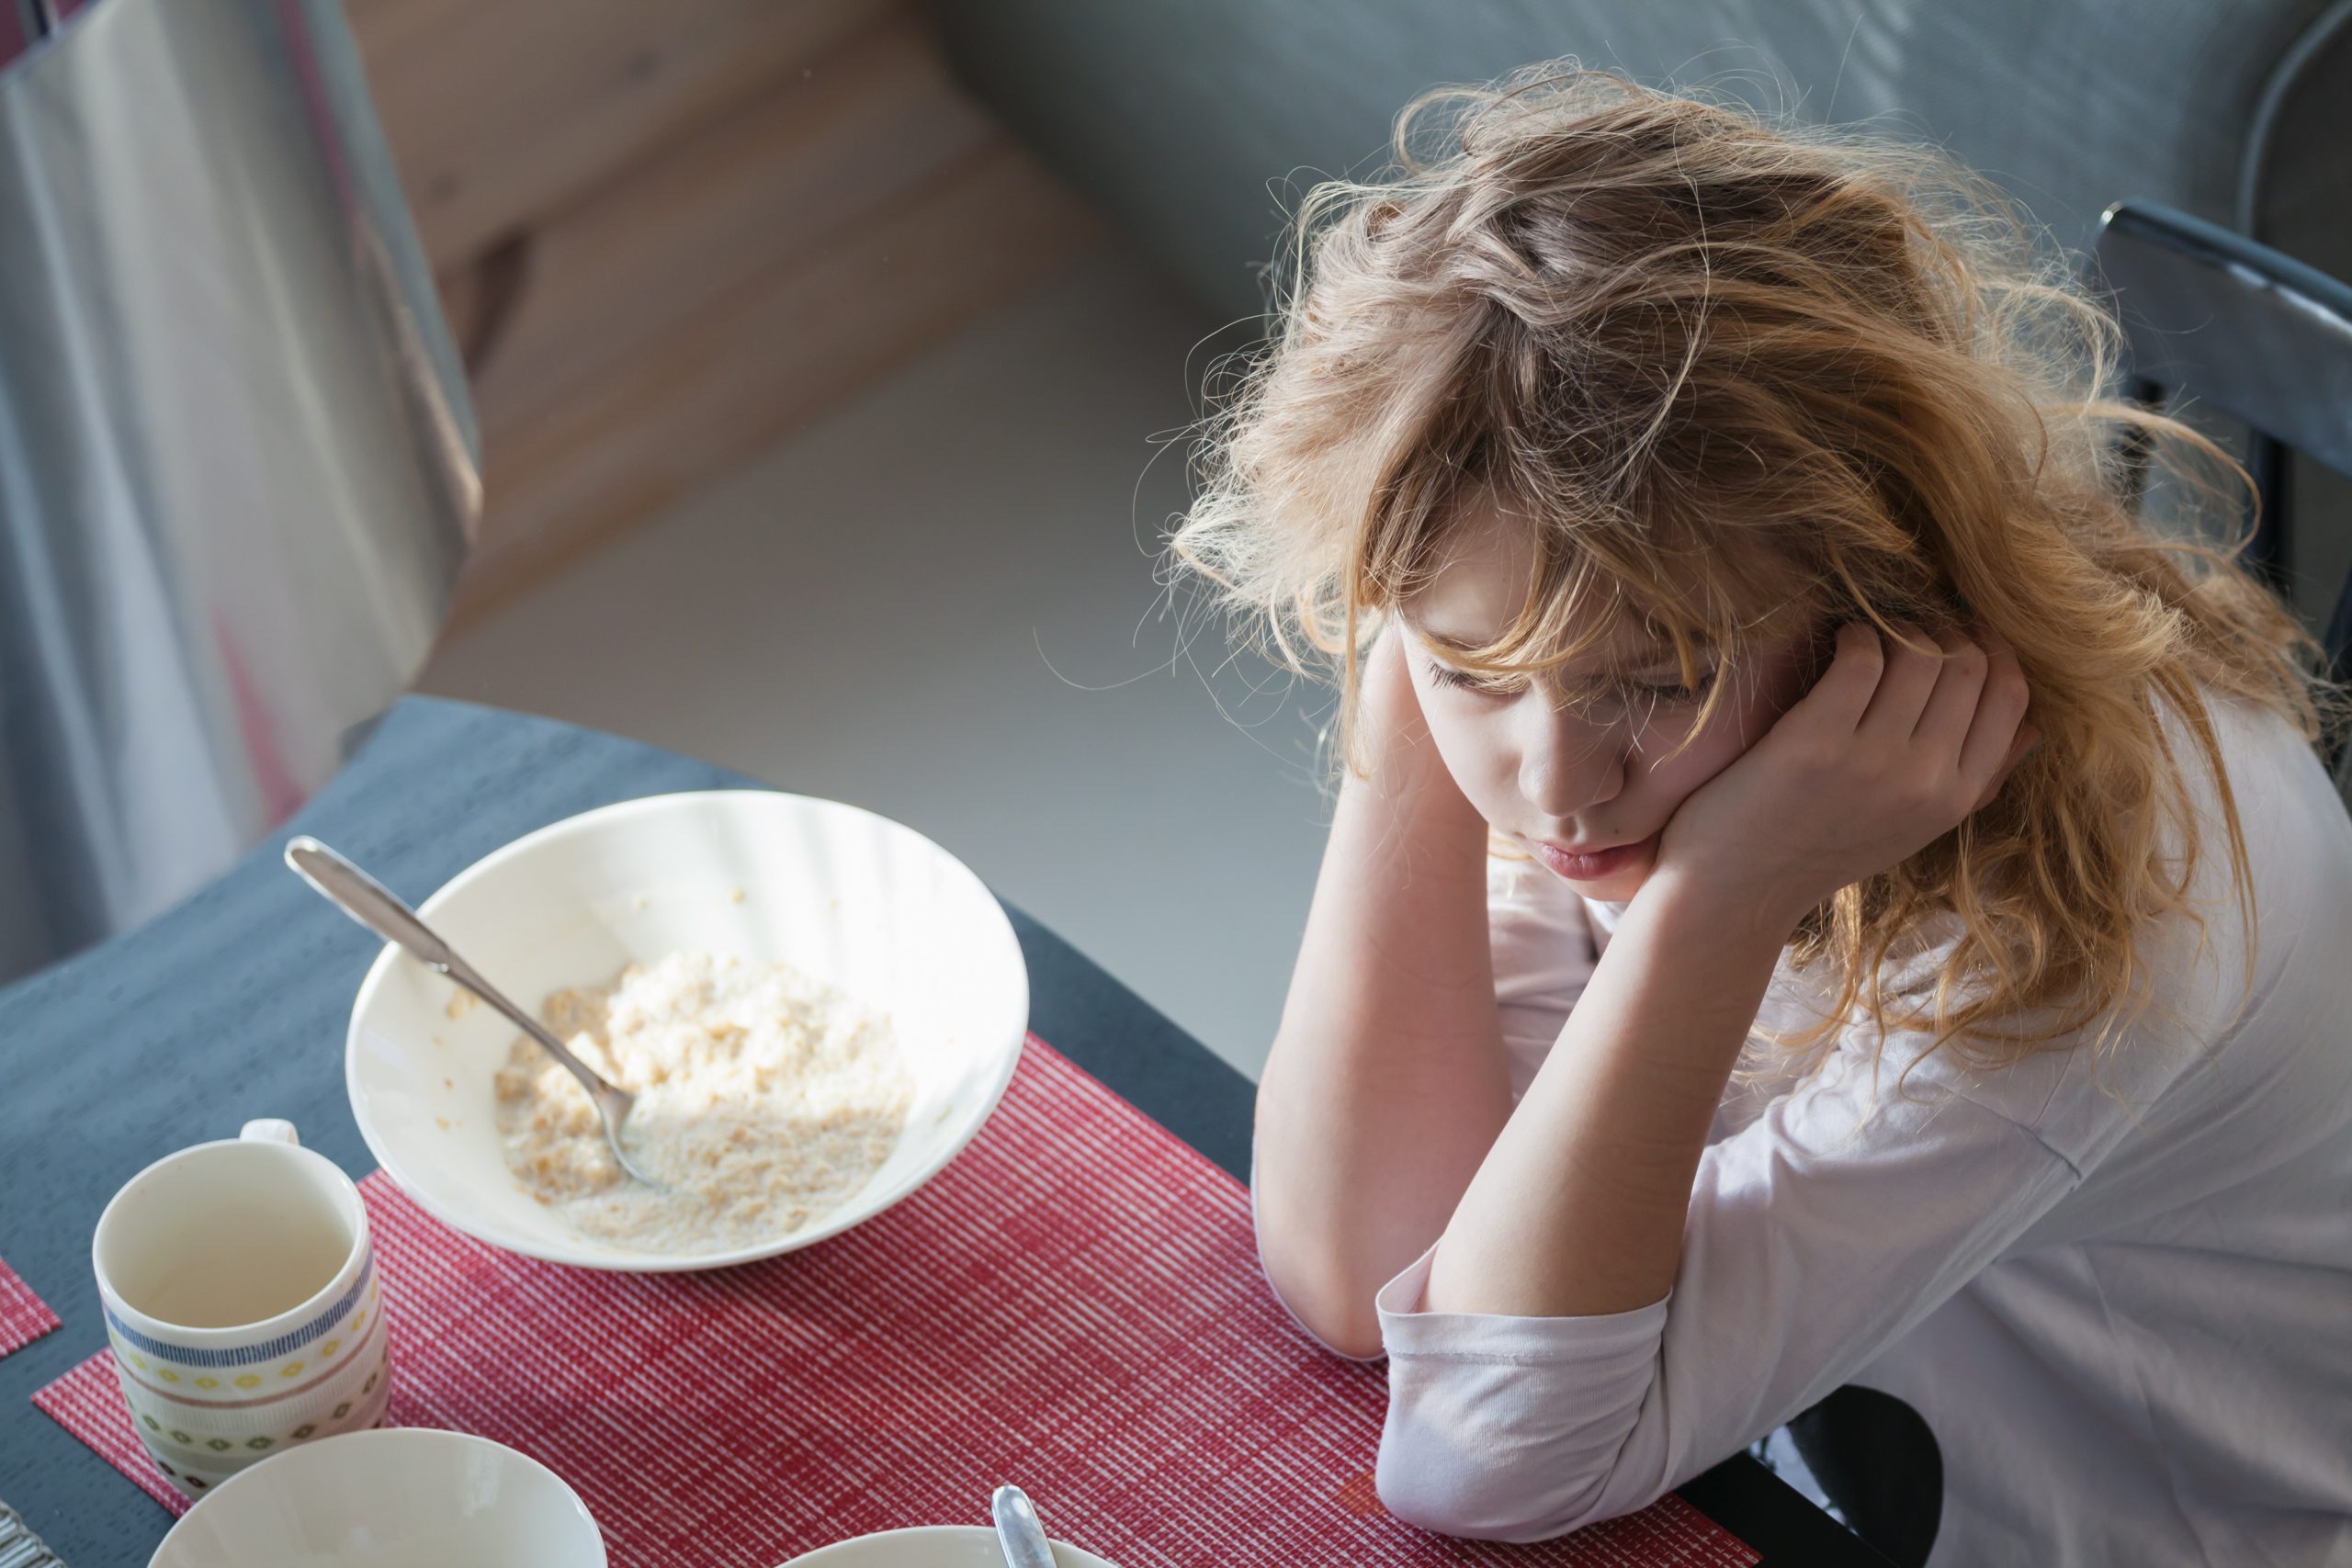 How to identify eating disorders in teenagers: 12 red flags!